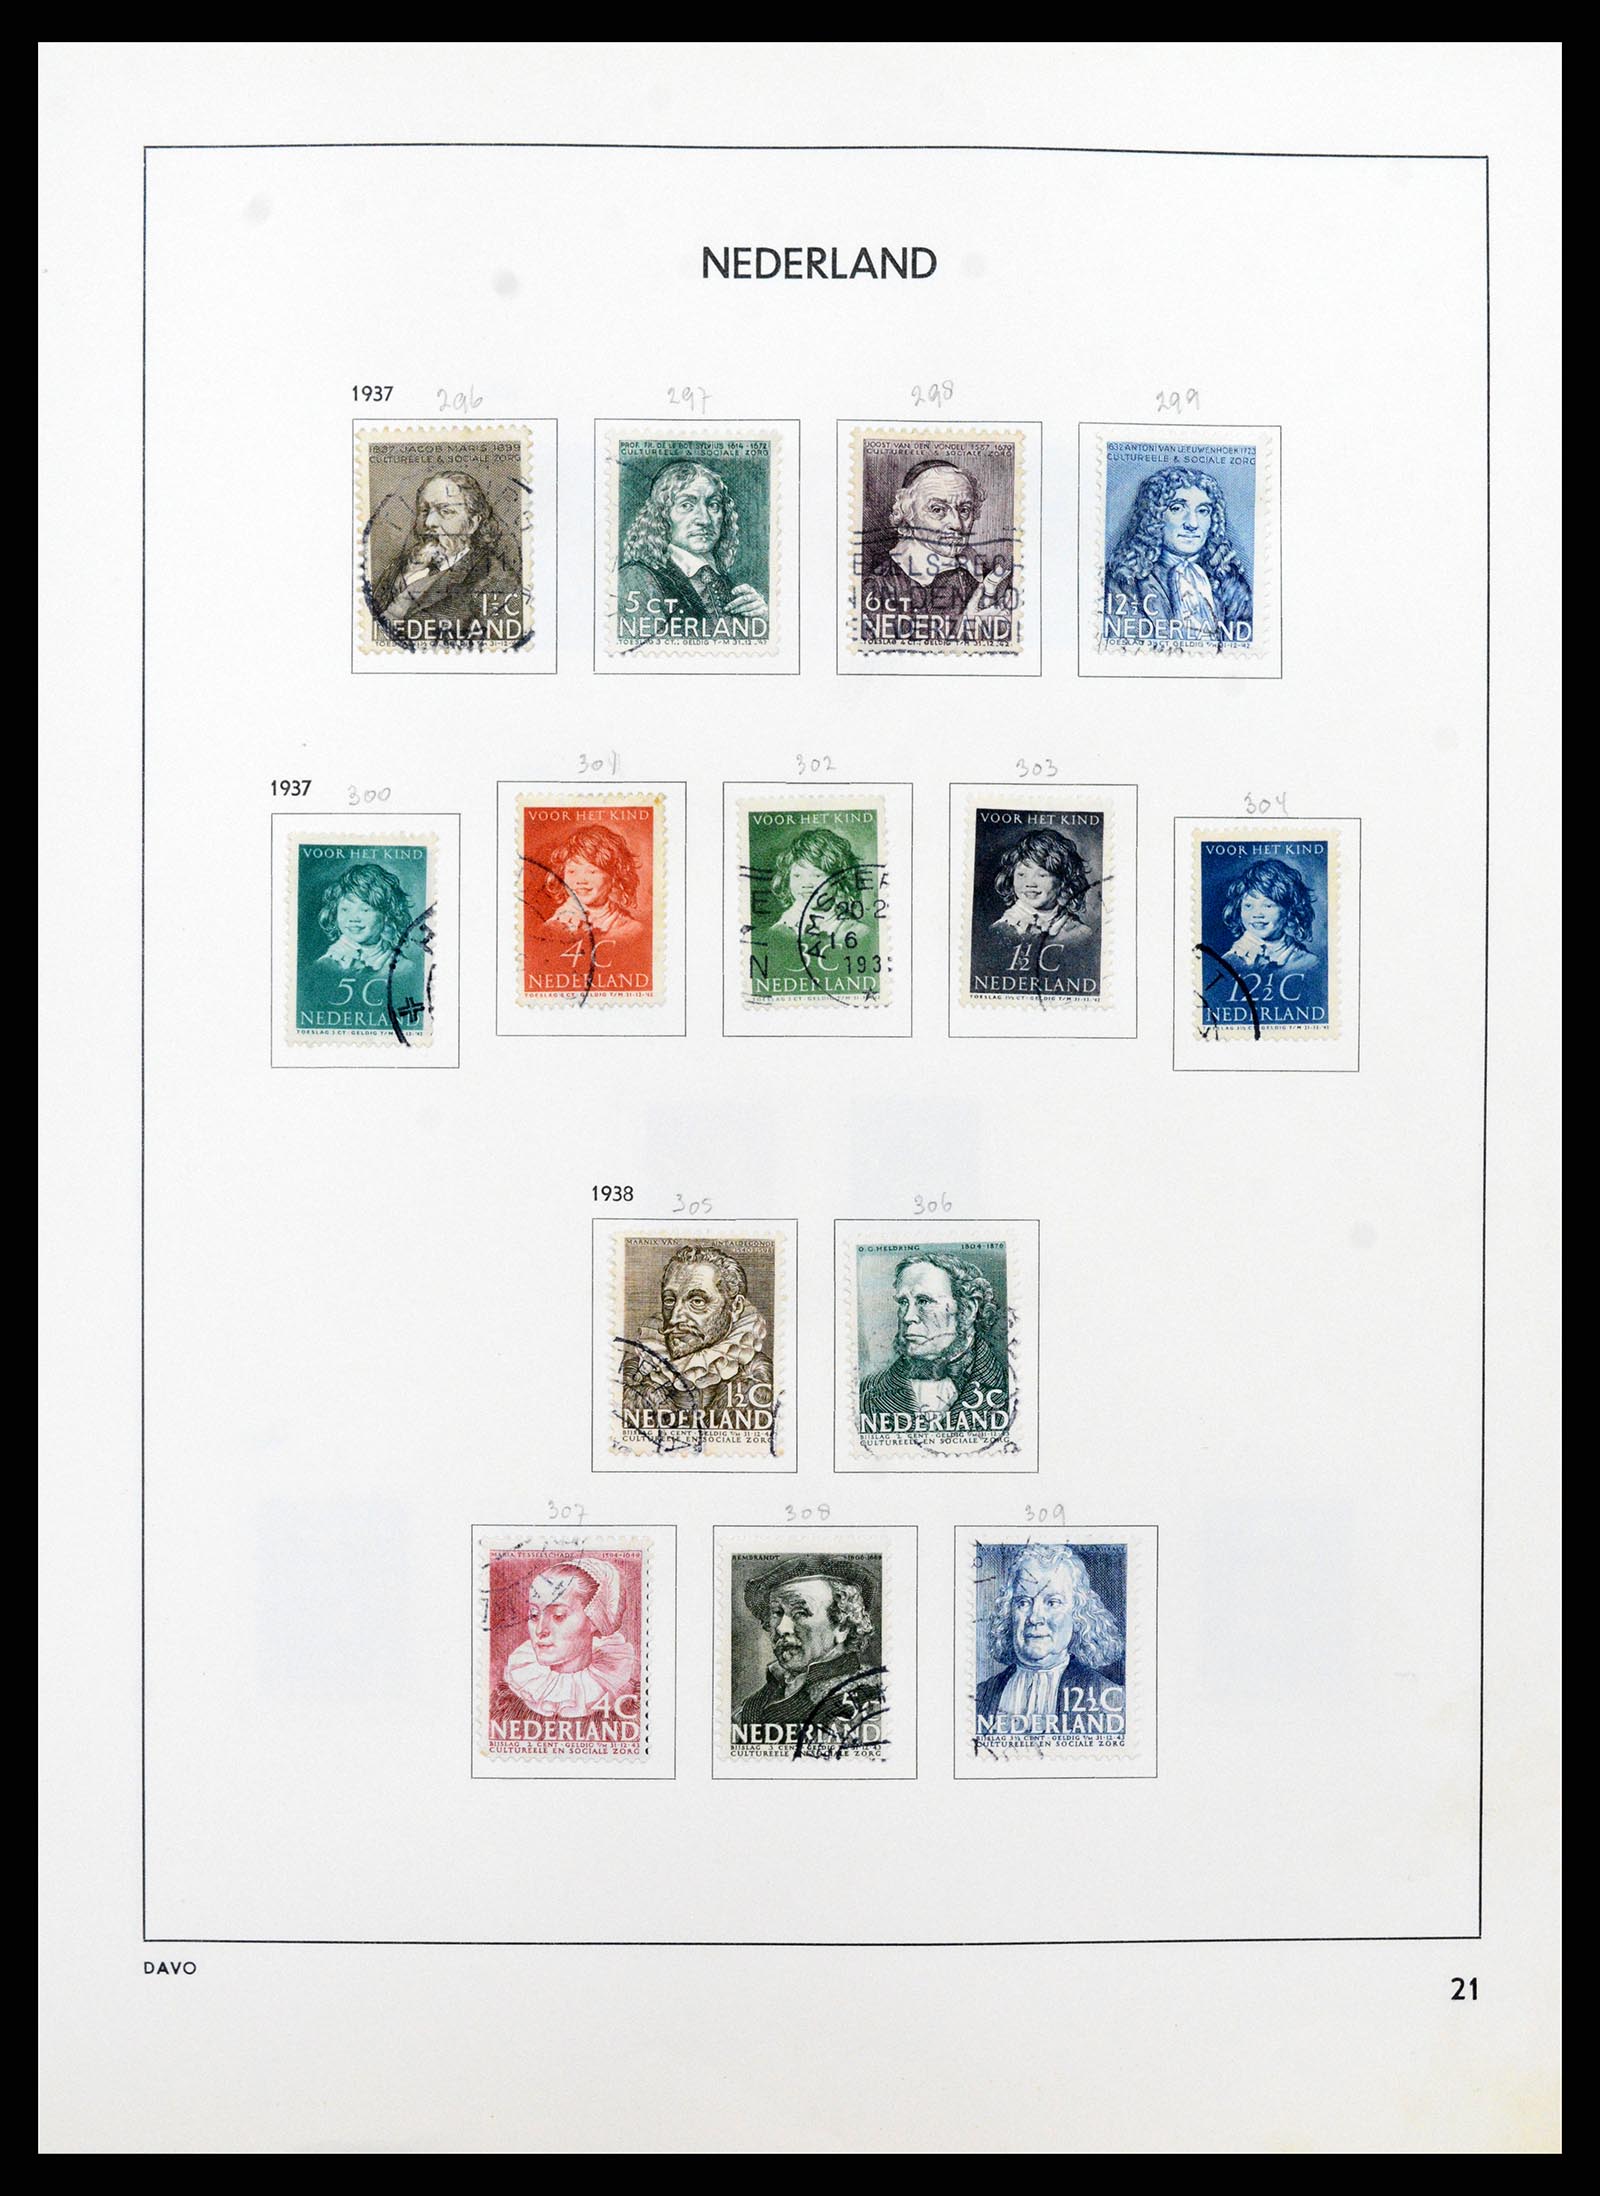 37346 021 - Stamp collection 37346 Netherlands 1852-1996.